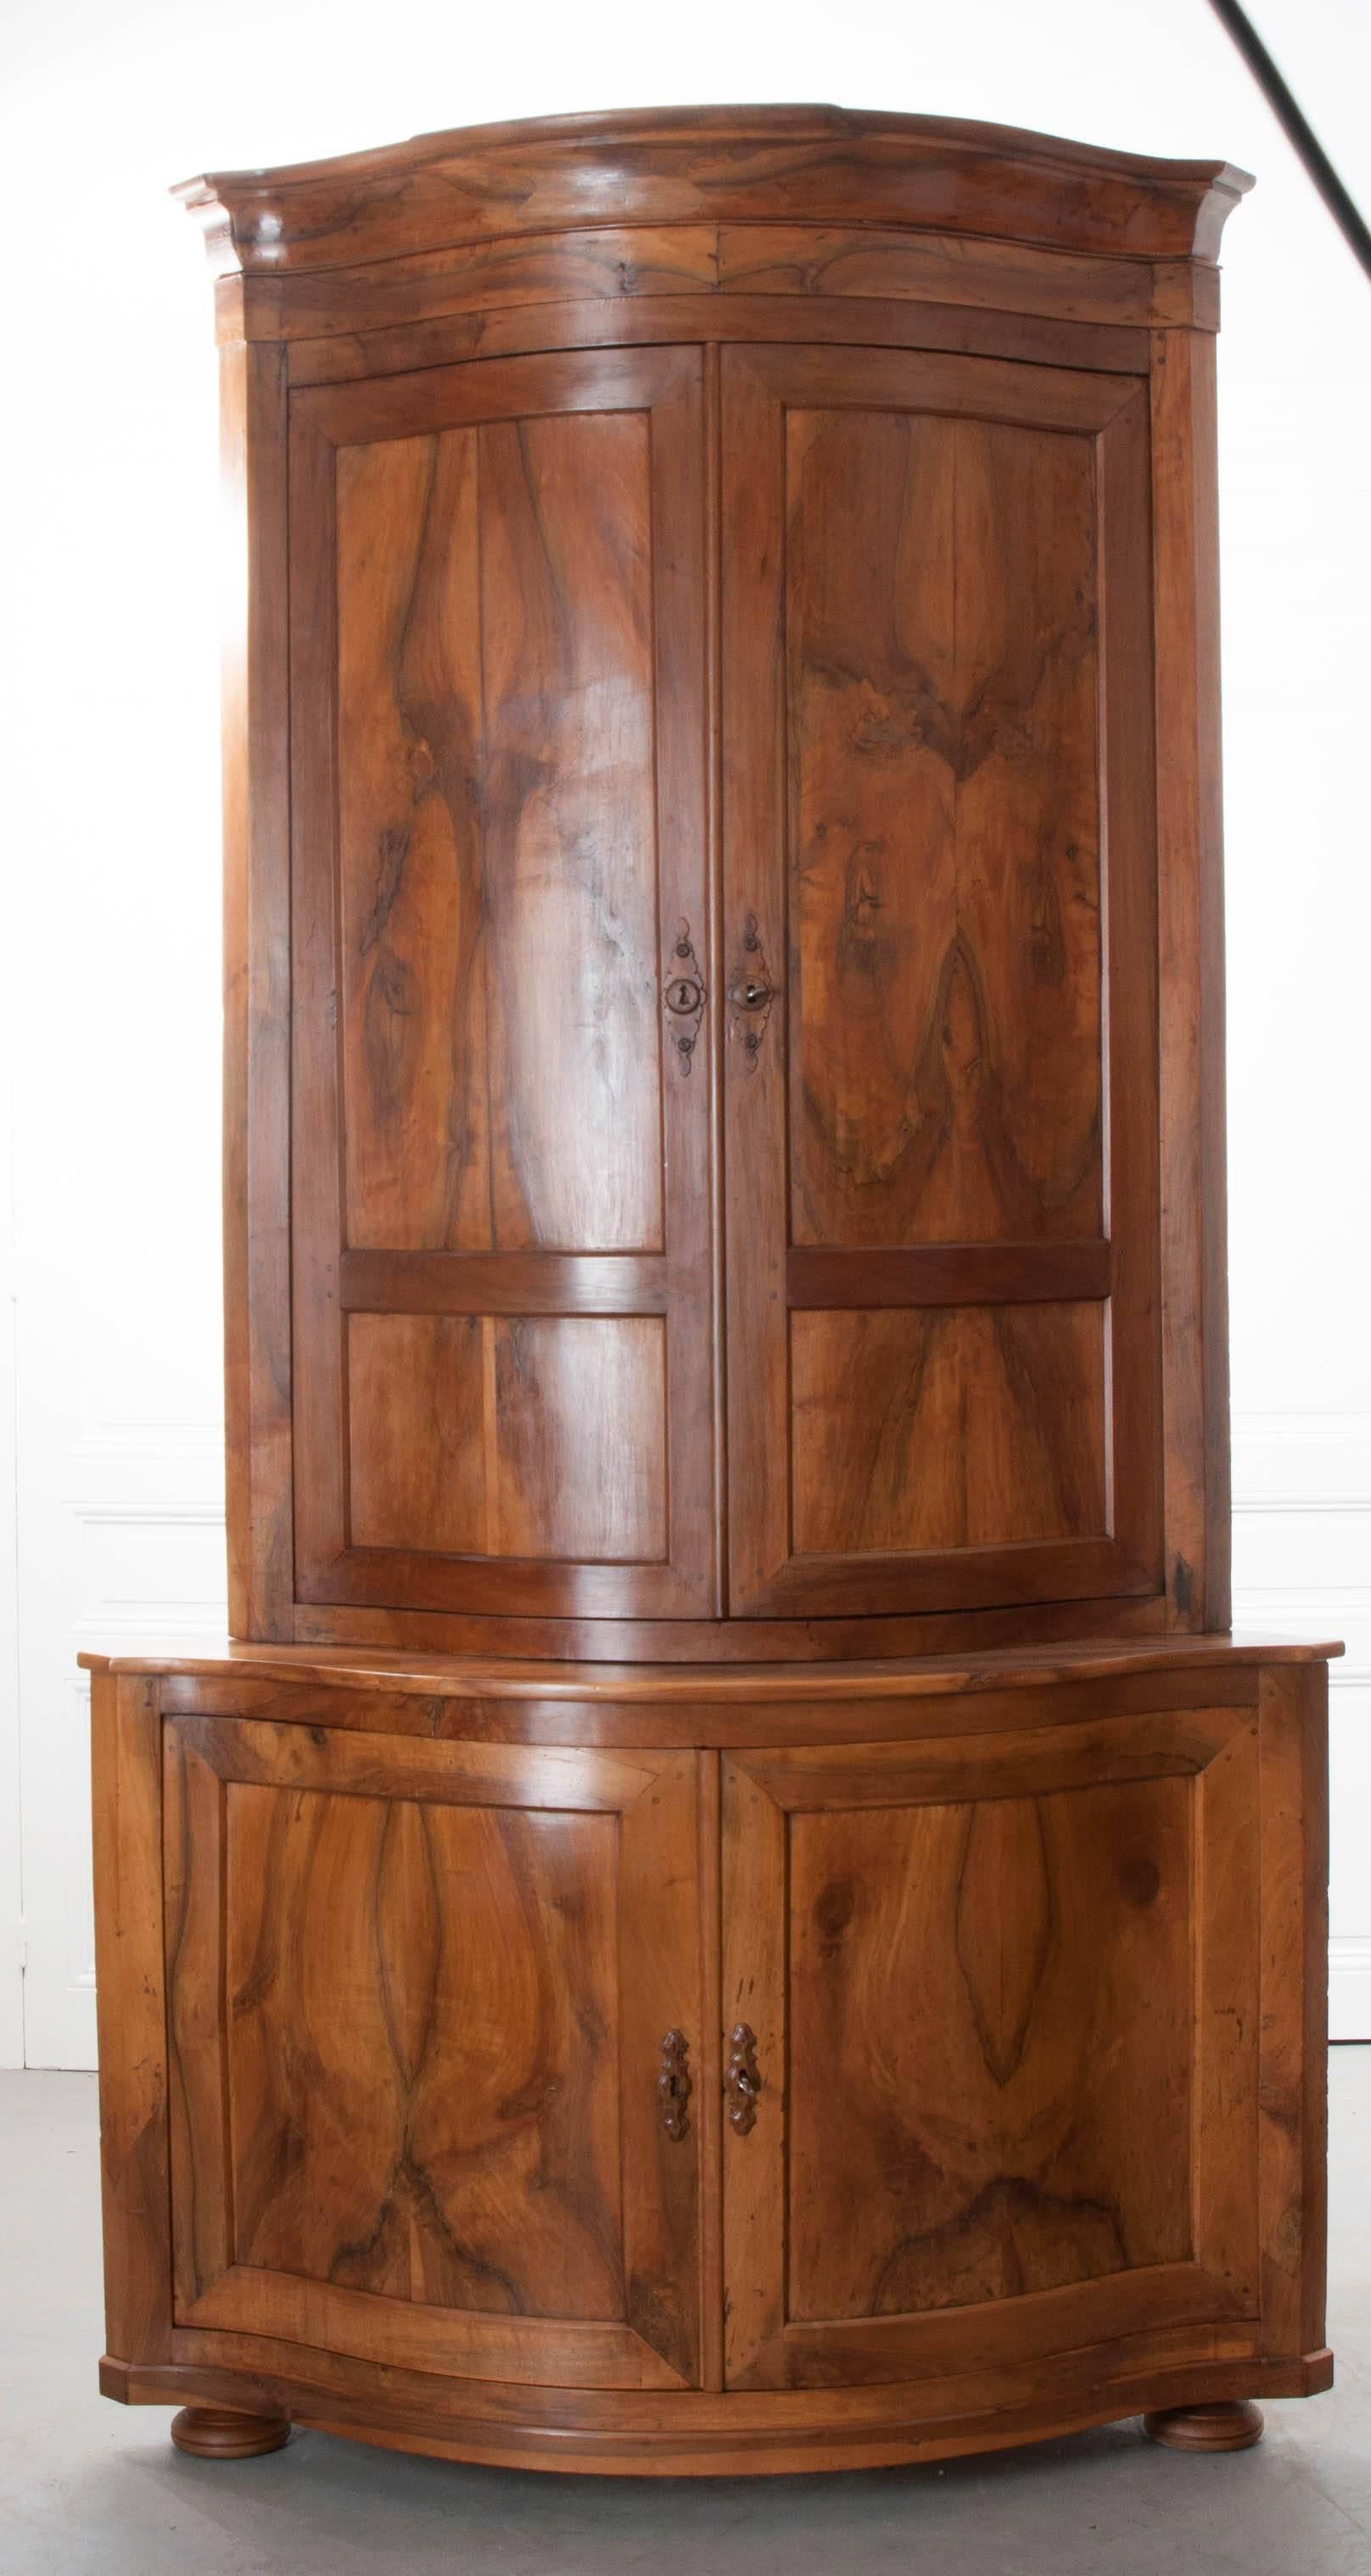 A striking pair of walnut buffet a’deux corps corner cabinets from 19th century France. These beautiful antique cabinets have gracefully curved fronts that give them a distinct, stylish appearance, and also maximize the space available inside for